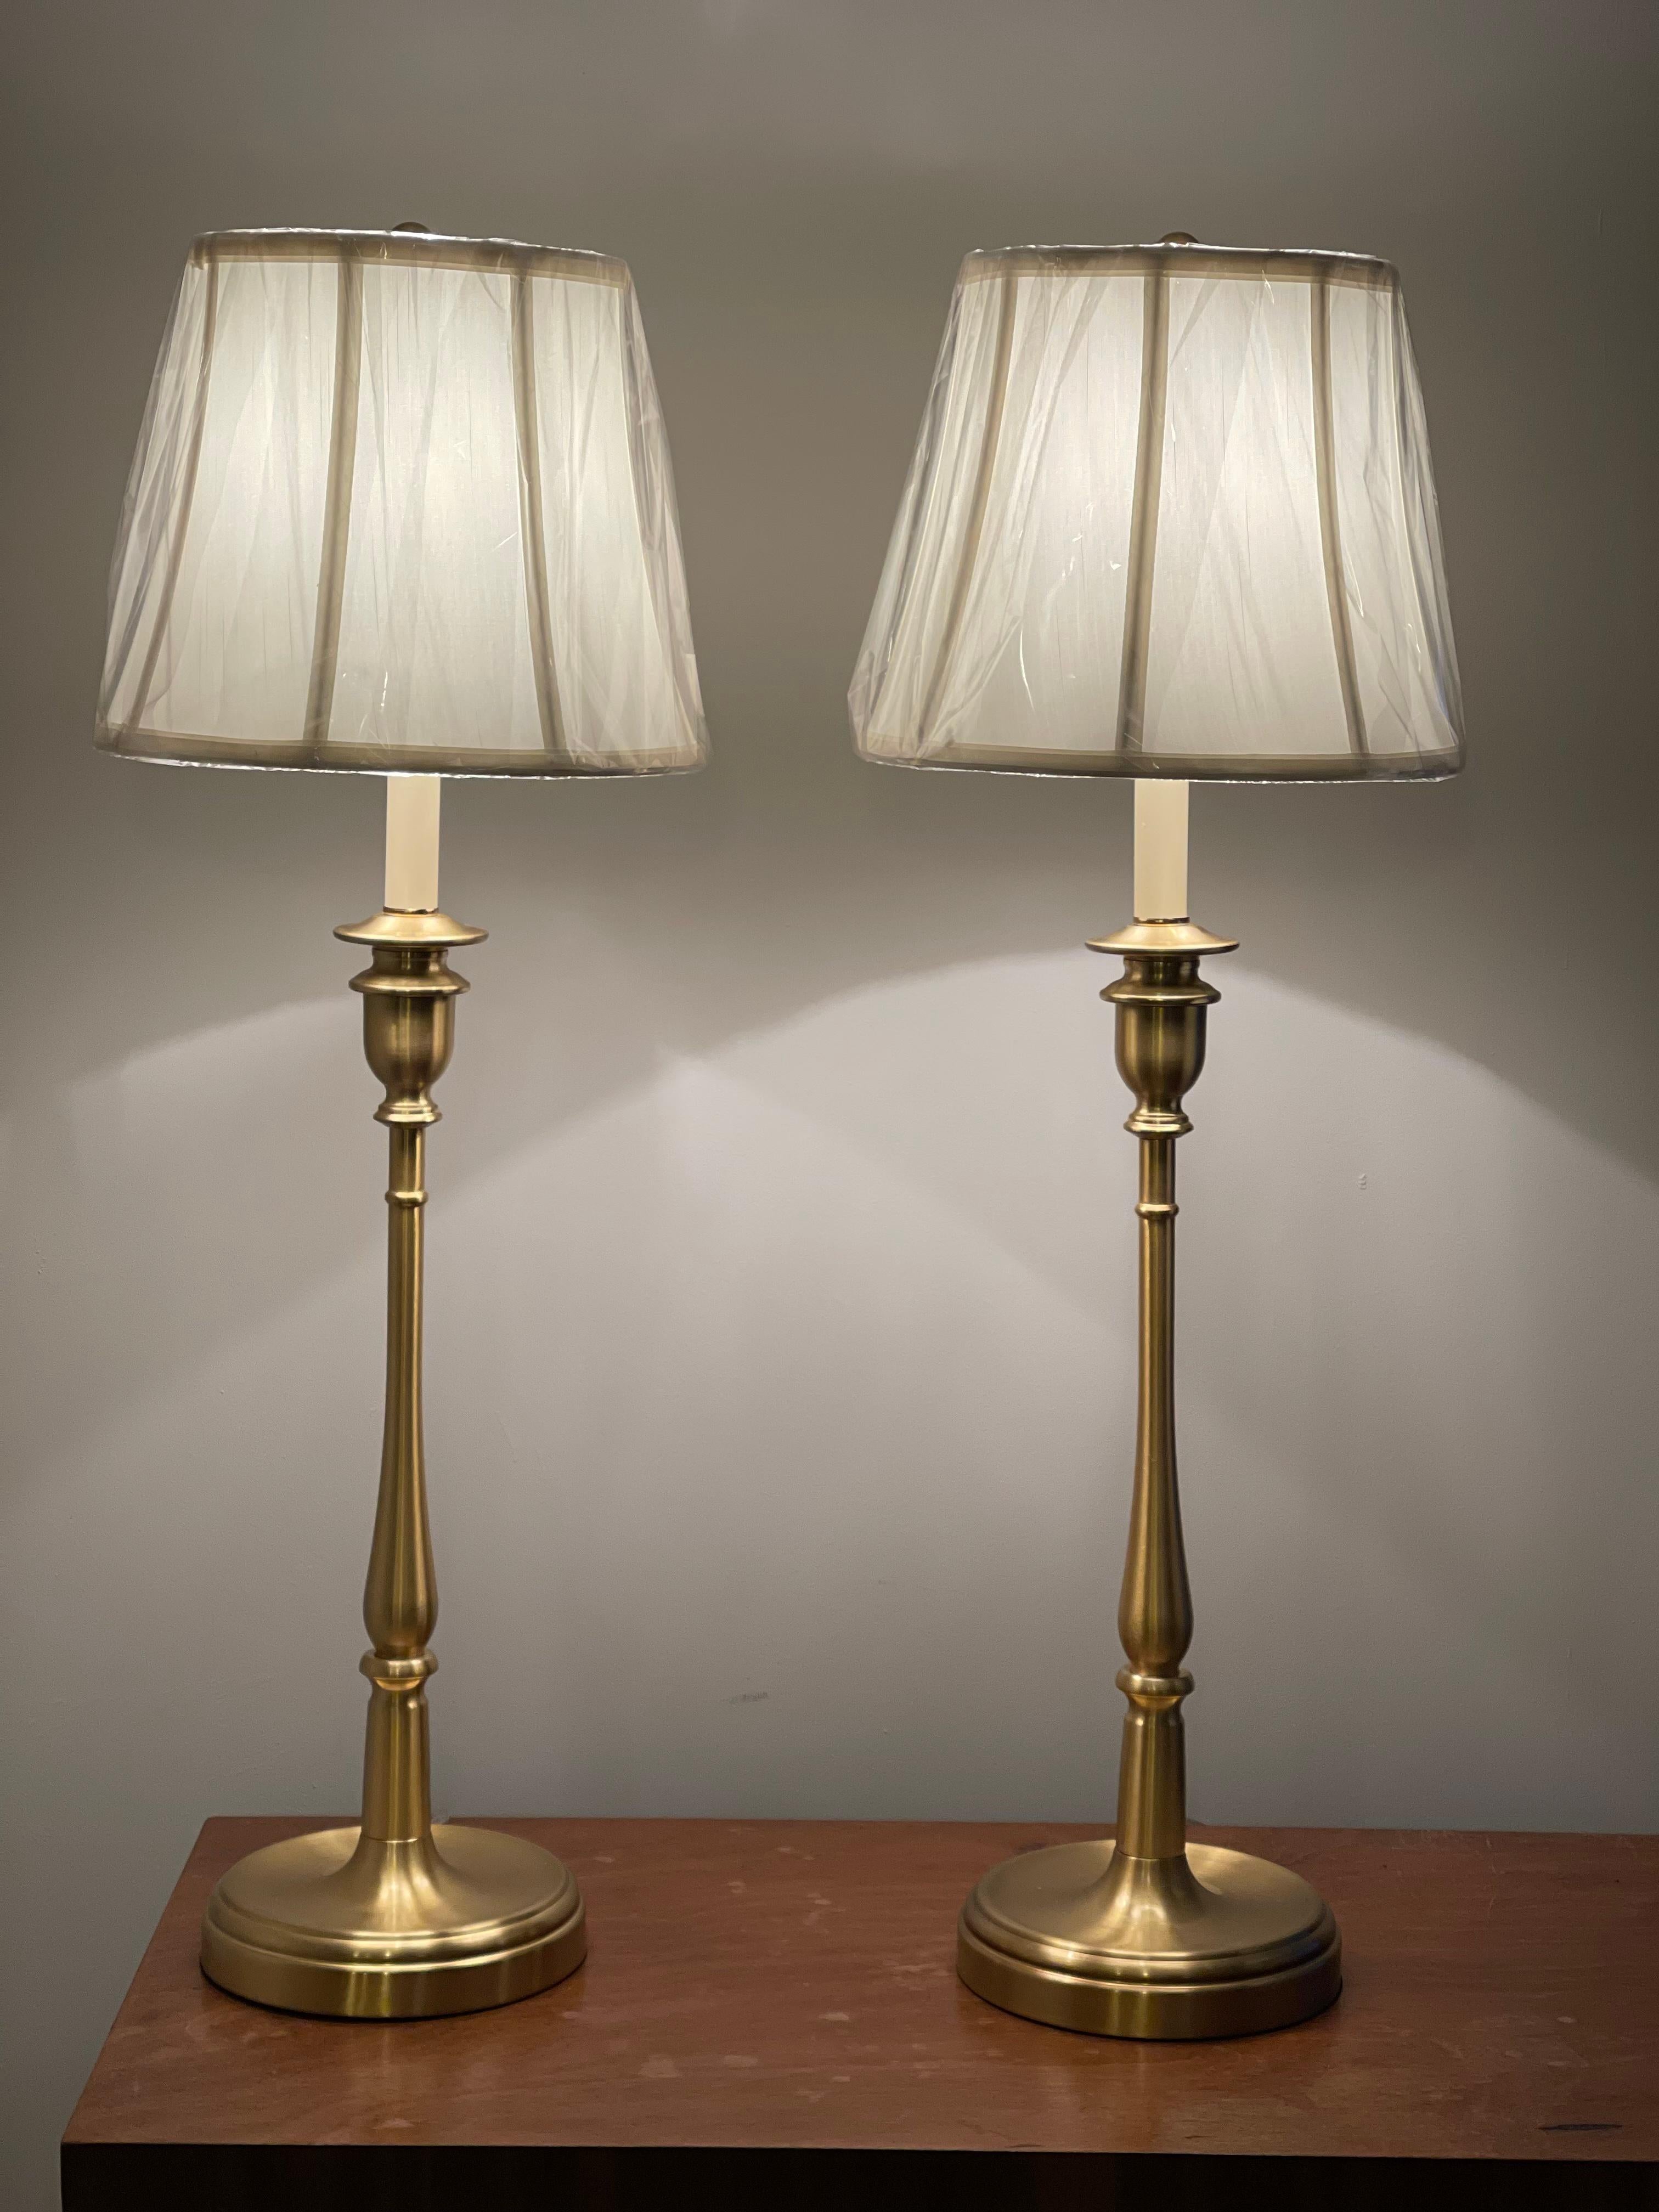 Hand-Crafted Stunning Pair of Ralph Lauren Tall Victorian Brass Candle Table Lamp